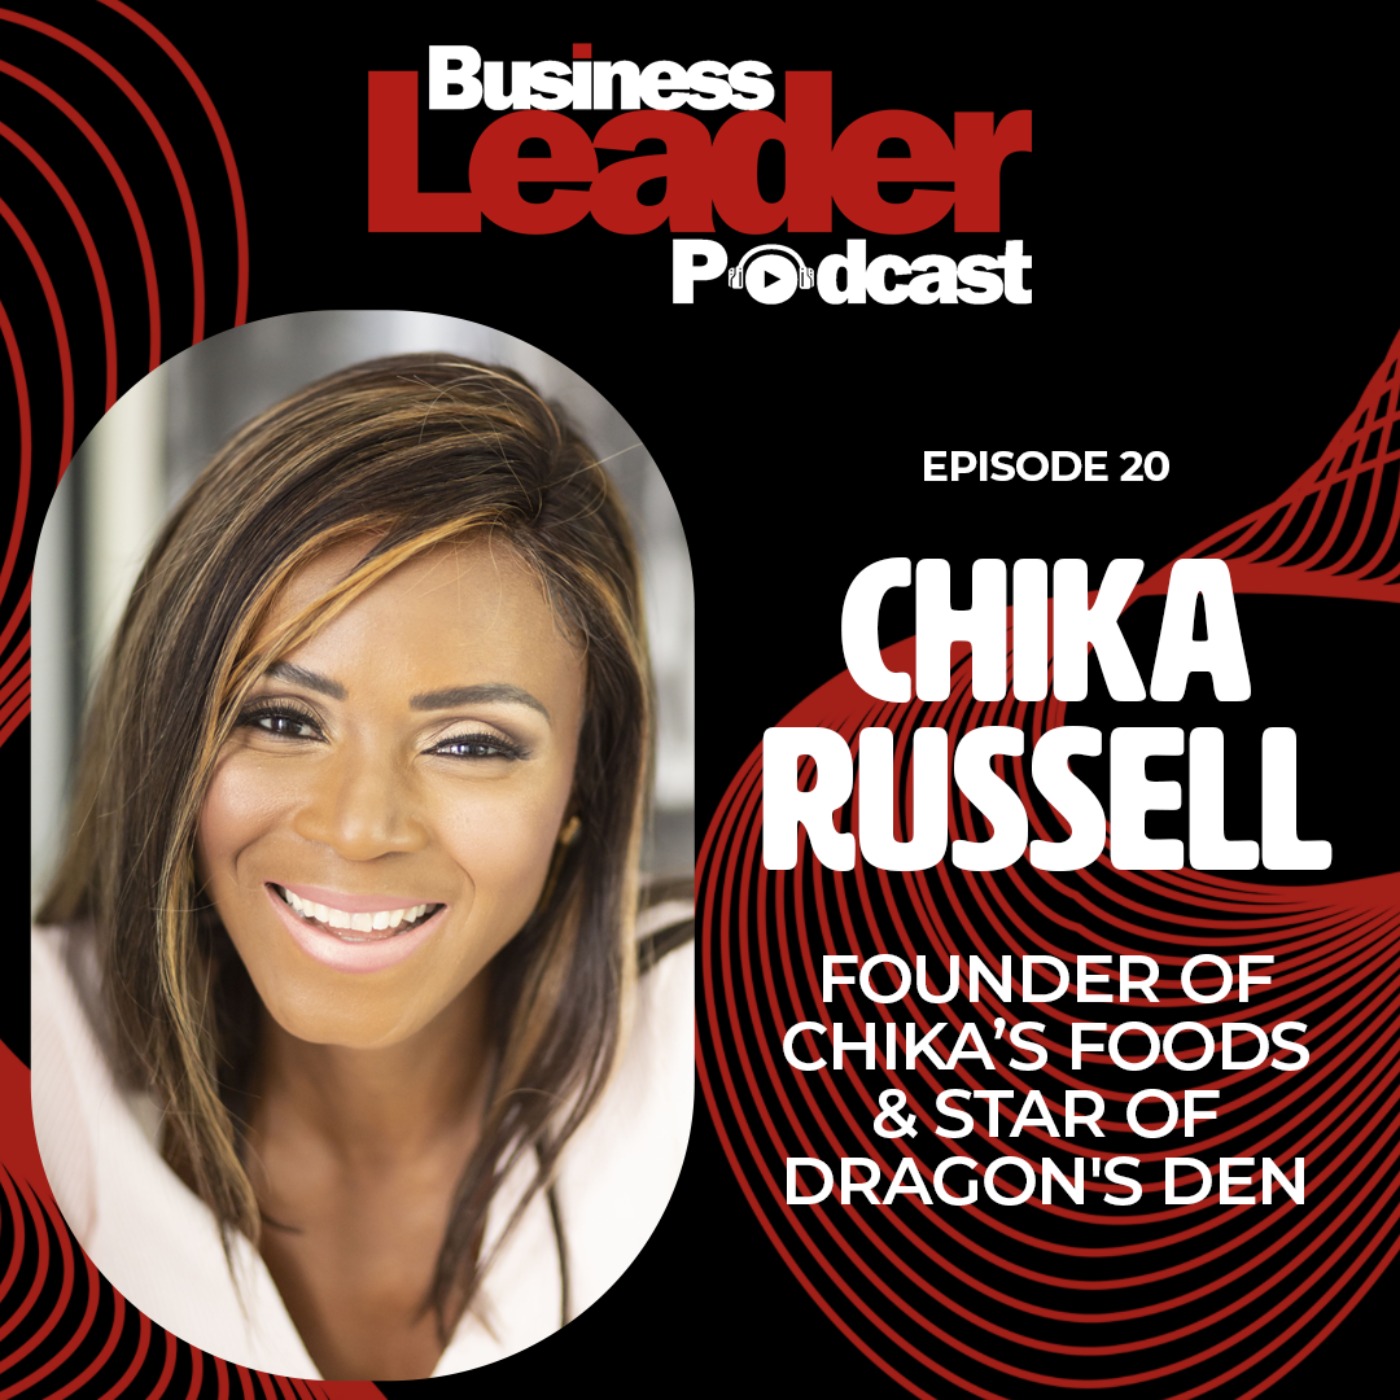 Chika Russell: founder of CHIKA’S Foods and star of Dragon’s Den